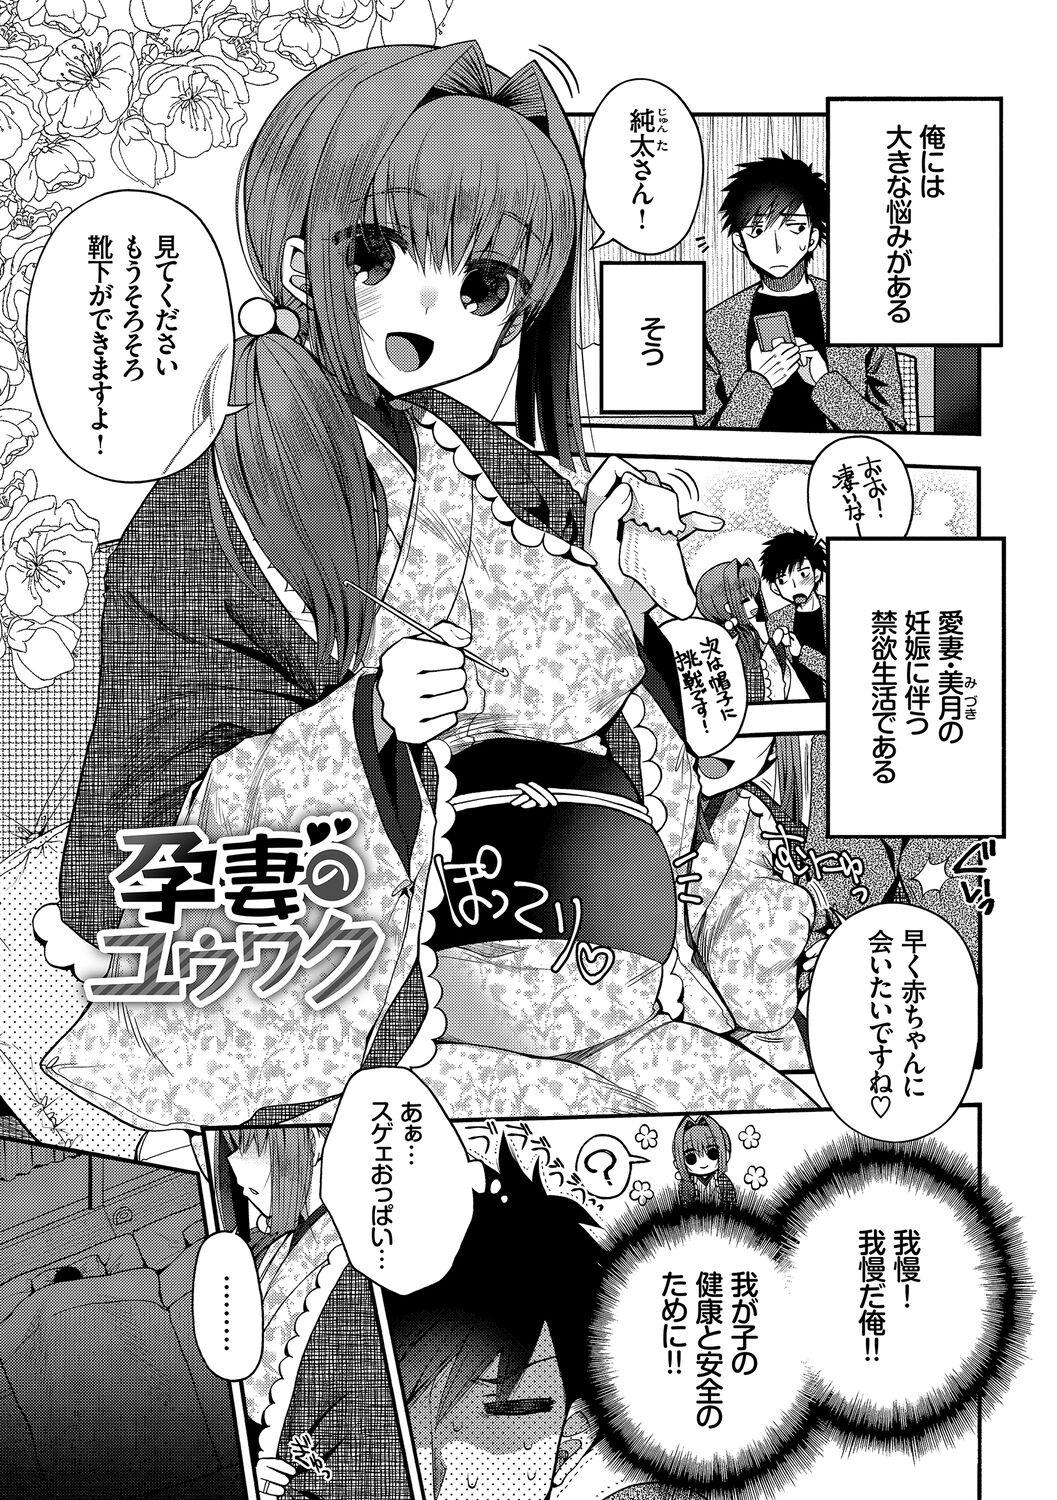 Hatsukoi Melty - Melty First Love 190